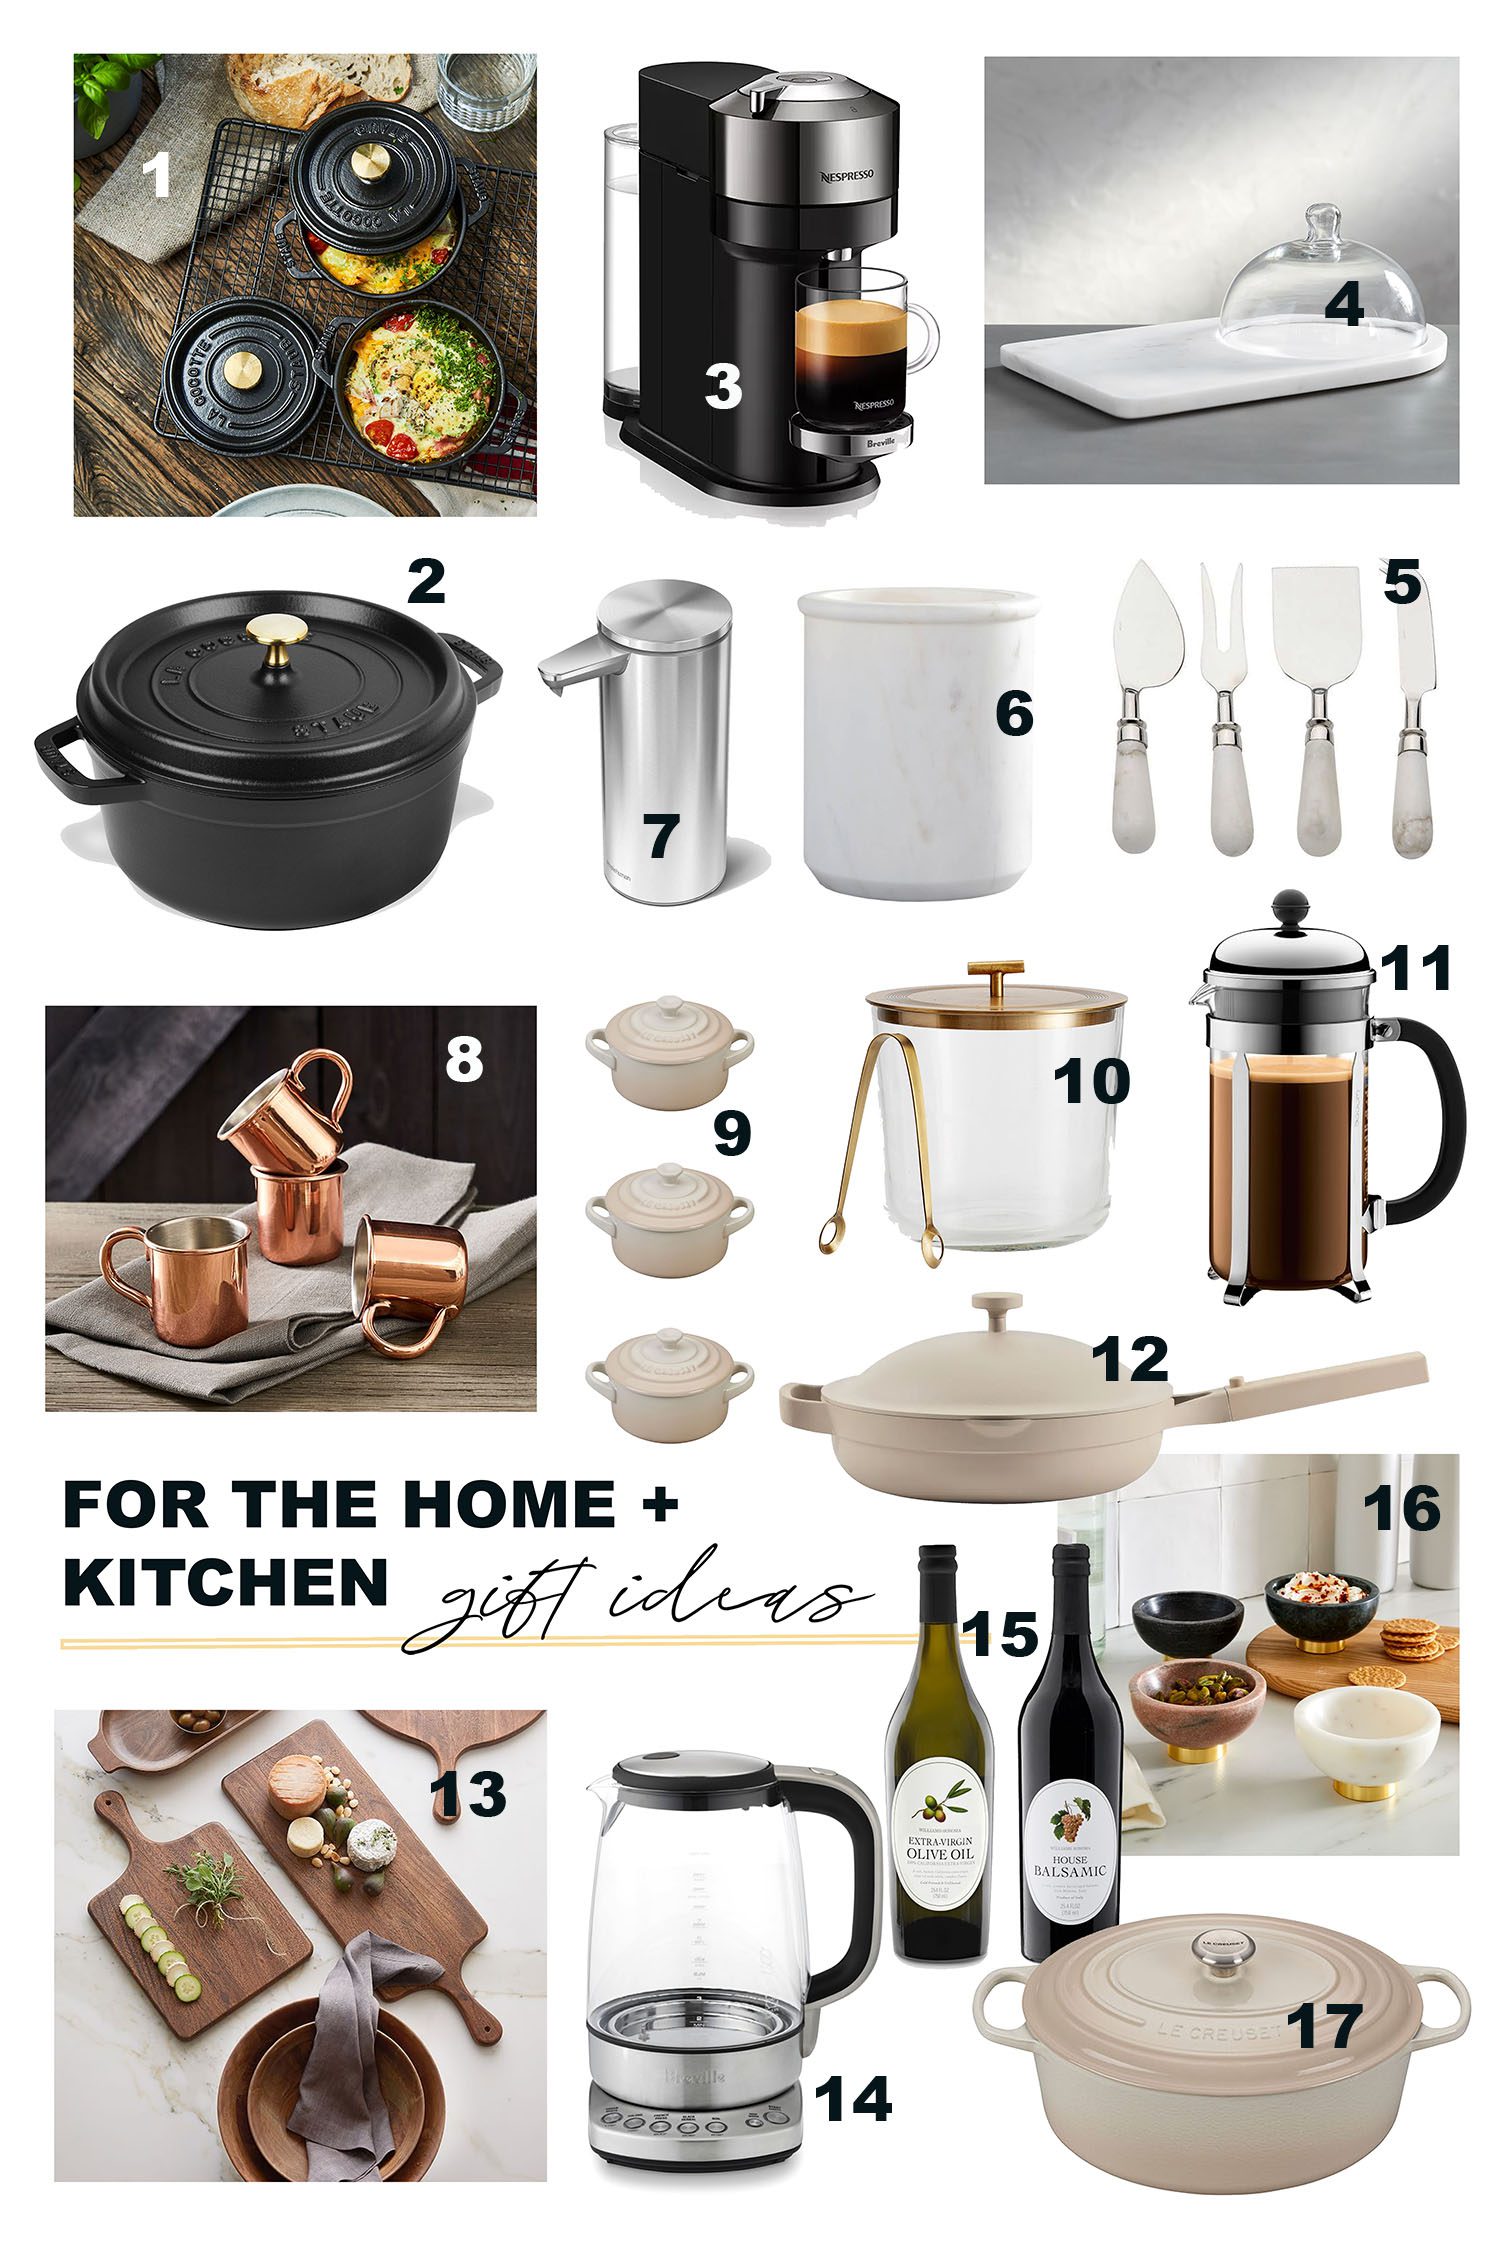 Kitchen Decor Gift Guide With A Touch Of Aqua * Zesty Olive